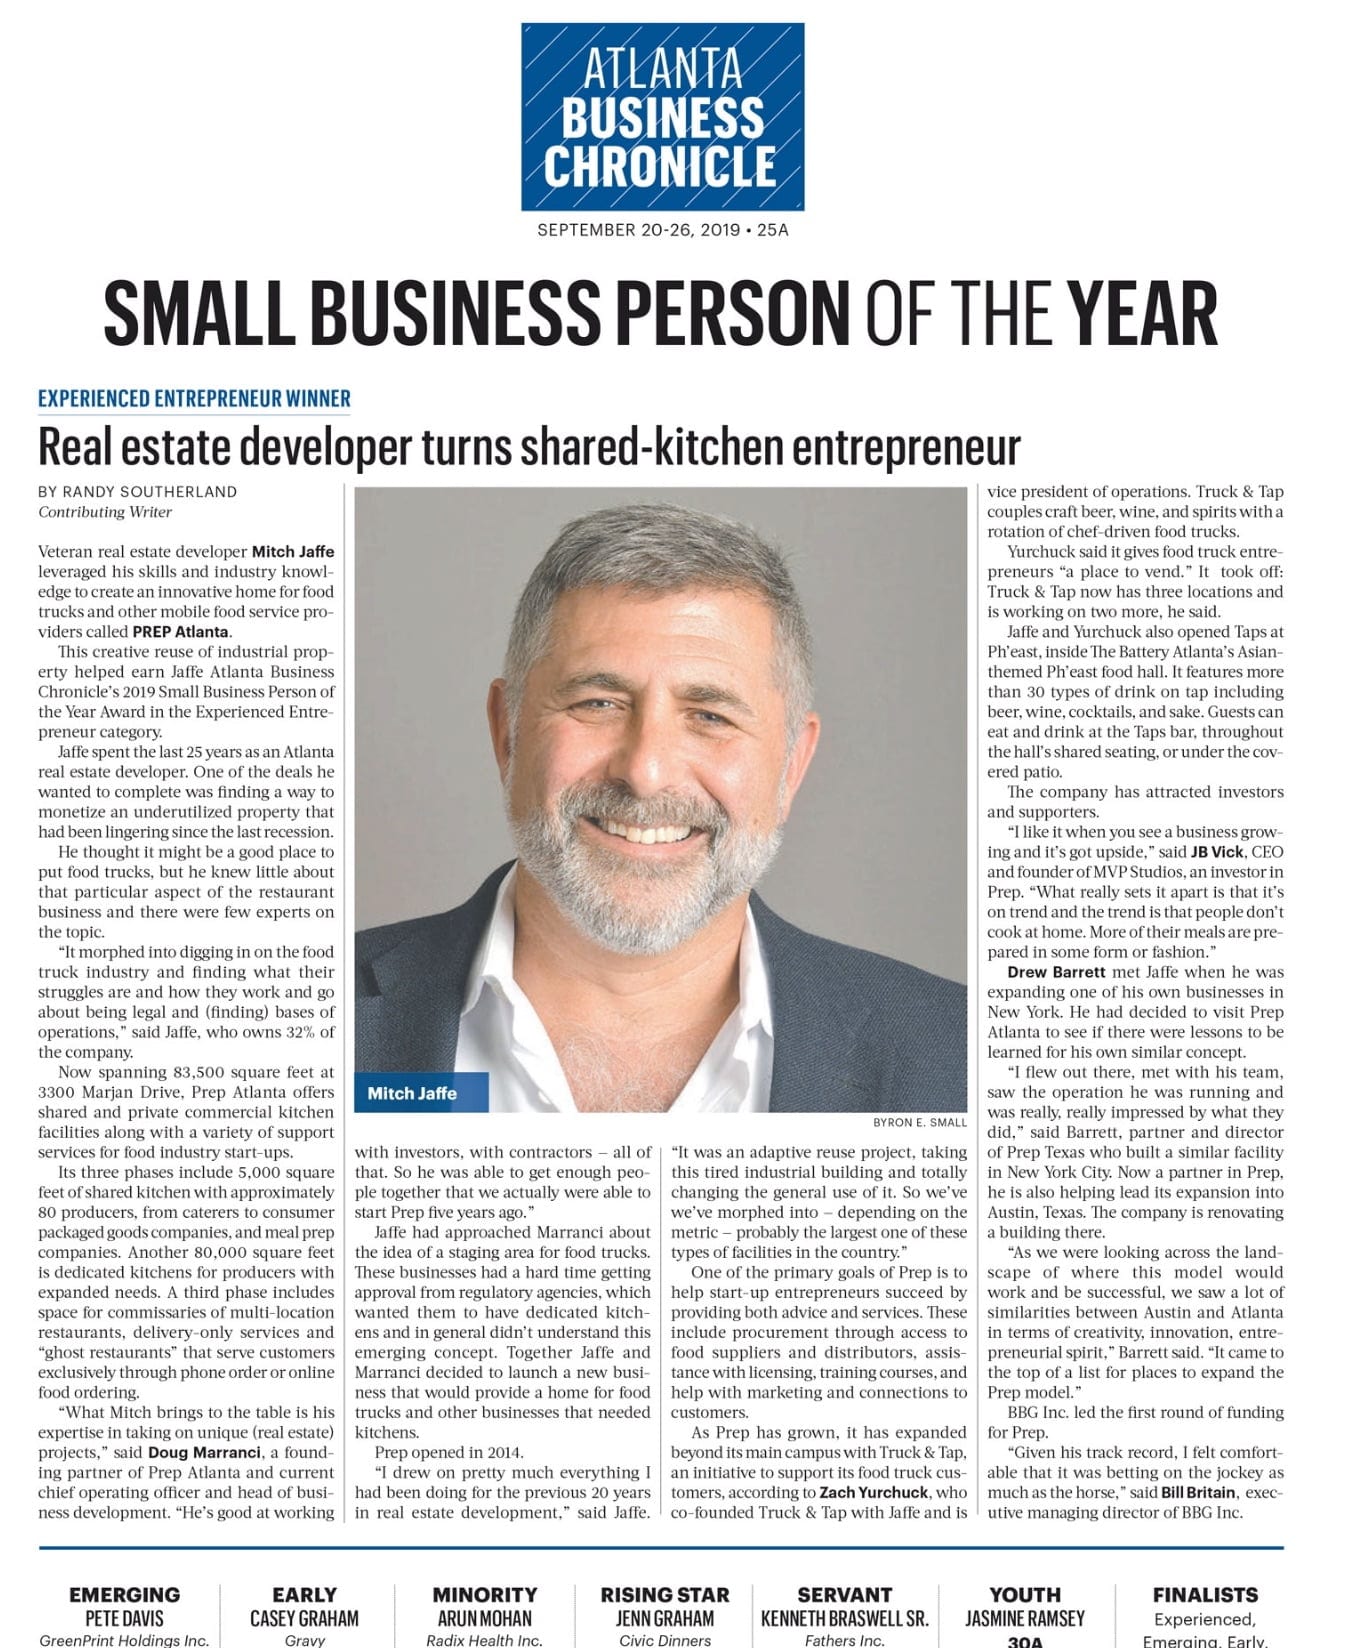 Small Business Person of the Year